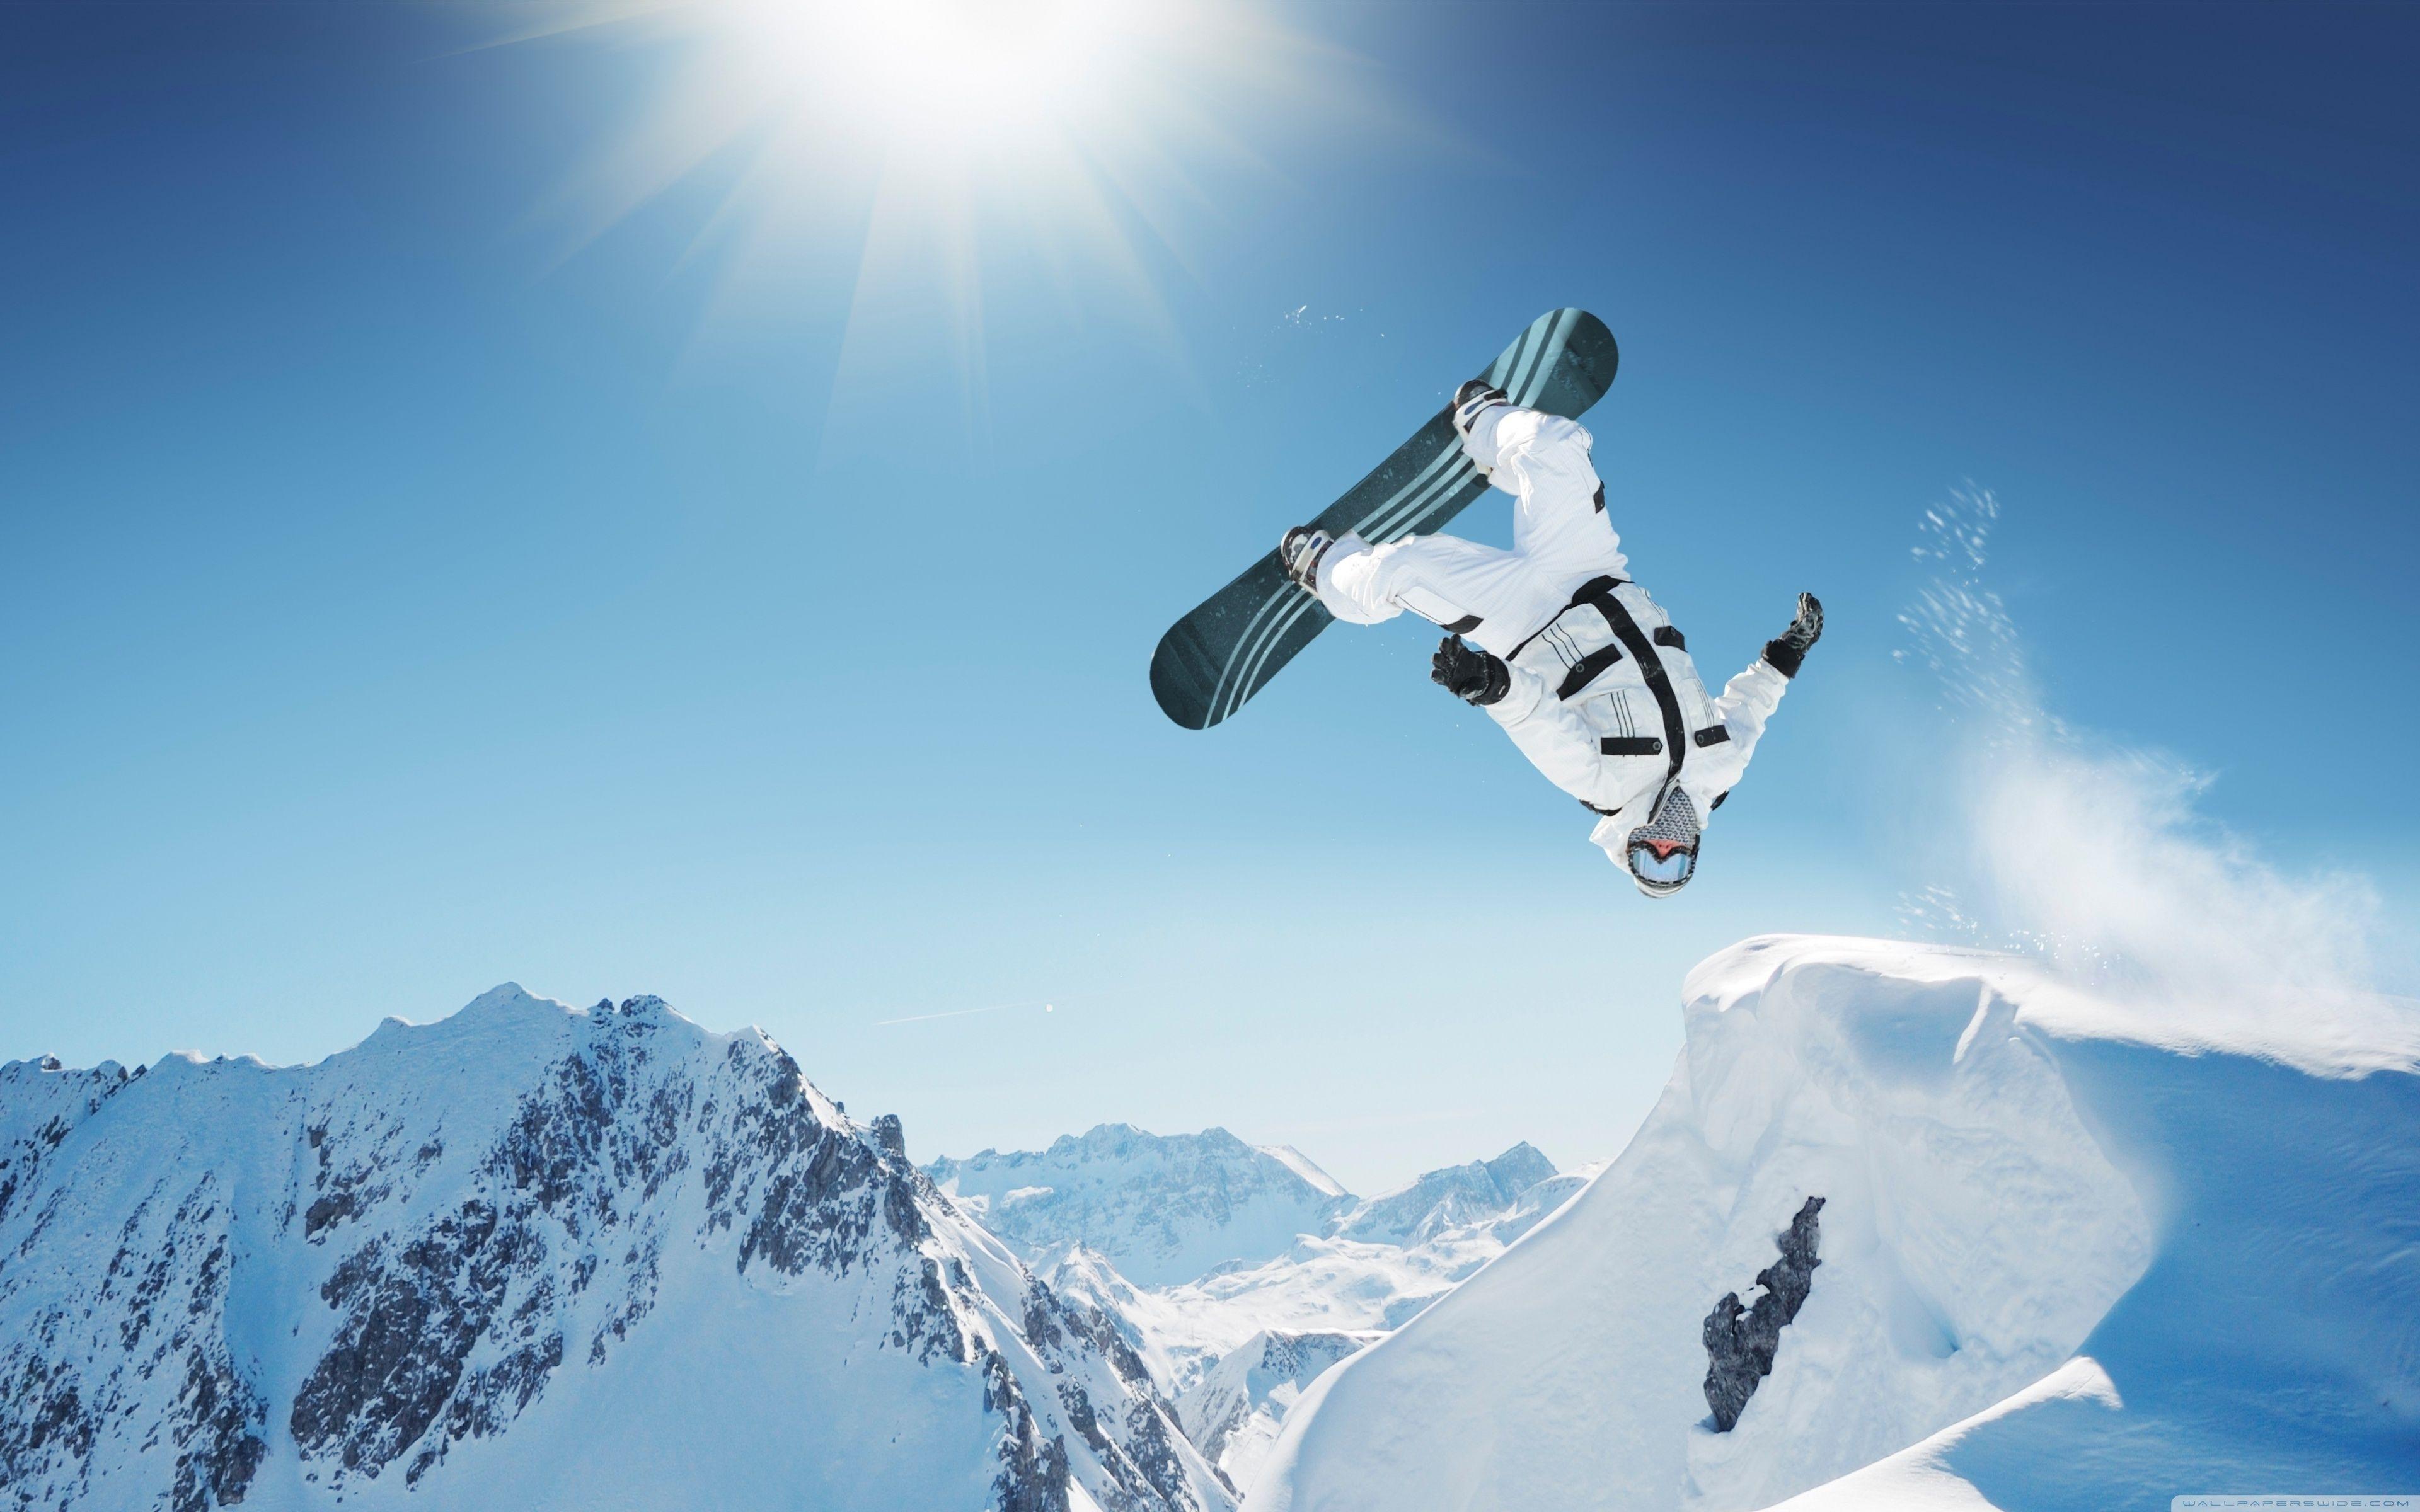 Snowboard in the snow on the mountain Hd wallpaper